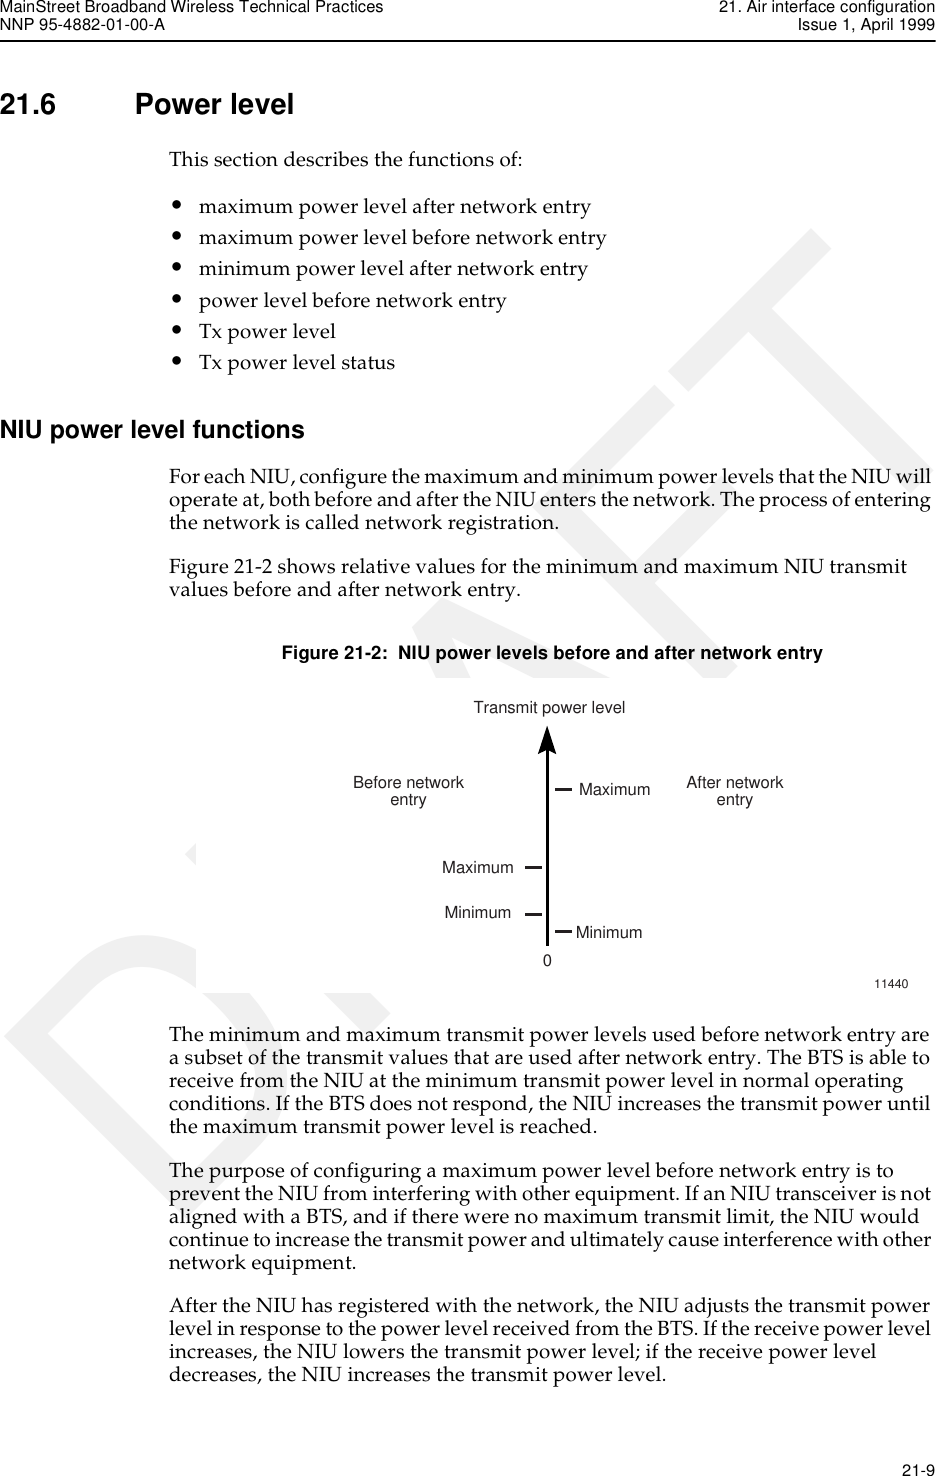 MainStreet Broadband Wireless Technical Practices 21. Air interface configurationNNP 95-4882-01-00-A Issue 1, April 1999   21-9DRAFT21.6 Power levelThis section describes the functions of:•maximum power level after network entry•maximum power level before network entry•minimum power level after network entry•power level before network entry•Tx power level•Tx power level statusNIU power level functionsFor each NIU, configure the maximum and minimum power levels that the NIU will operate at, both before and after the NIU enters the network. The process of entering the network is called network registration.Figure 21-2 shows relative values for the minimum and maximum NIU transmit values before and after network entry.Figure 21-2:  NIU power levels before and after network entryThe minimum and maximum transmit power levels used before network entry are a subset of the transmit values that are used after network entry. The BTS is able to receive from the NIU at the minimum transmit power level in normal operating conditions. If the BTS does not respond, the NIU increases the transmit power until the maximum transmit power level is reached.The purpose of configuring a maximum power level before network entry is to prevent the NIU from interfering with other equipment. If an NIU transceiver is not aligned with a BTS, and if there were no maximum transmit limit, the NIU would continue to increase the transmit power and ultimately cause interference with other network equipment.After the NIU has registered with the network, the NIU adjusts the transmit power level in response to the power level received from the BTS. If the receive power level increases, the NIU lowers the transmit power level; if the receive power level decreases, the NIU increases the transmit power level.Transmit power level0Before networkentry After networkentryMaximumMaximumMinimum Minimum11440